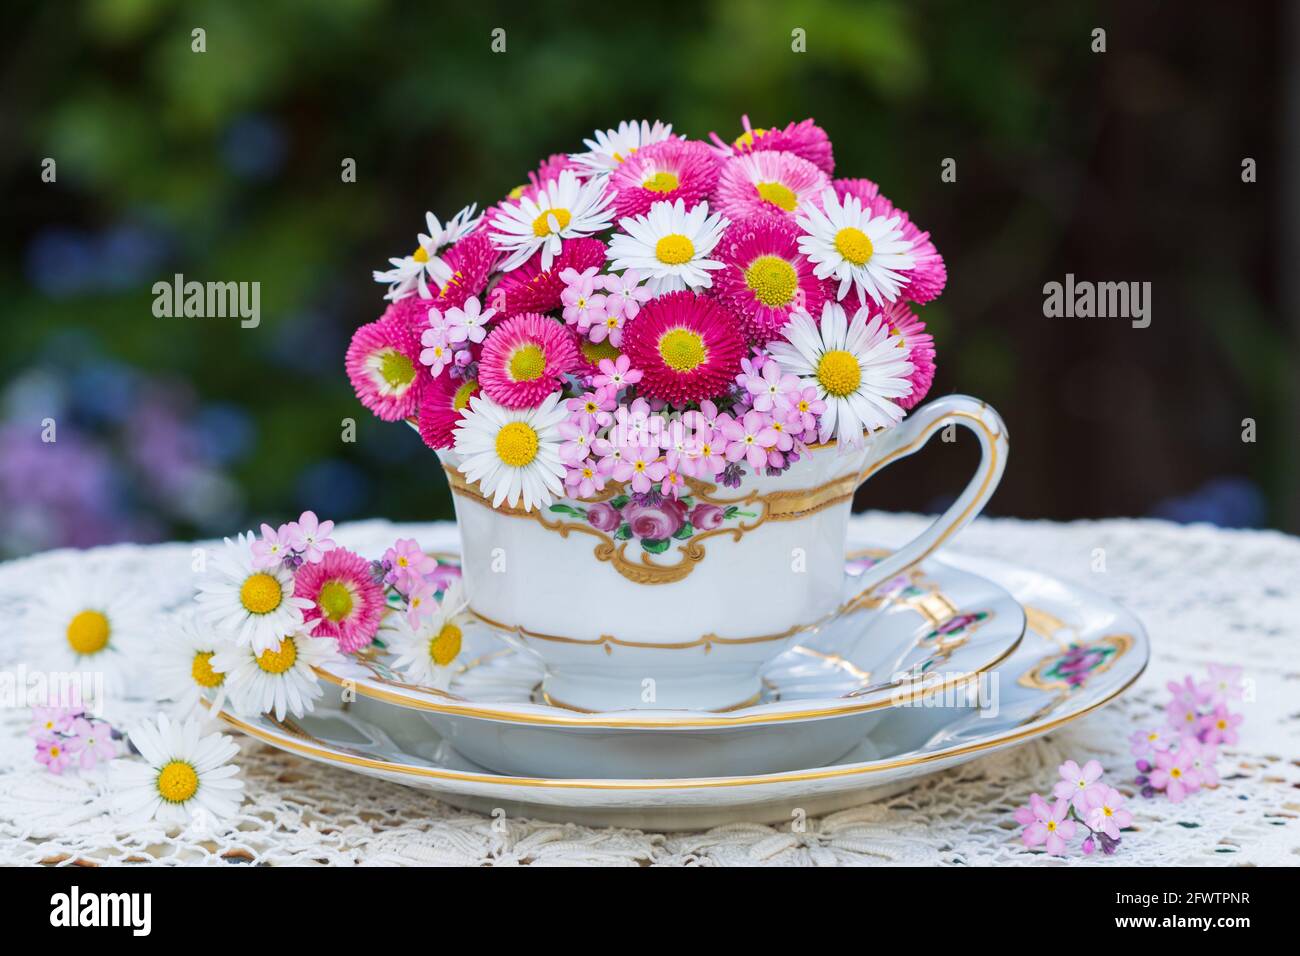 bouquet with pink bellis flowers and daisies in vintage cup Stock Photo